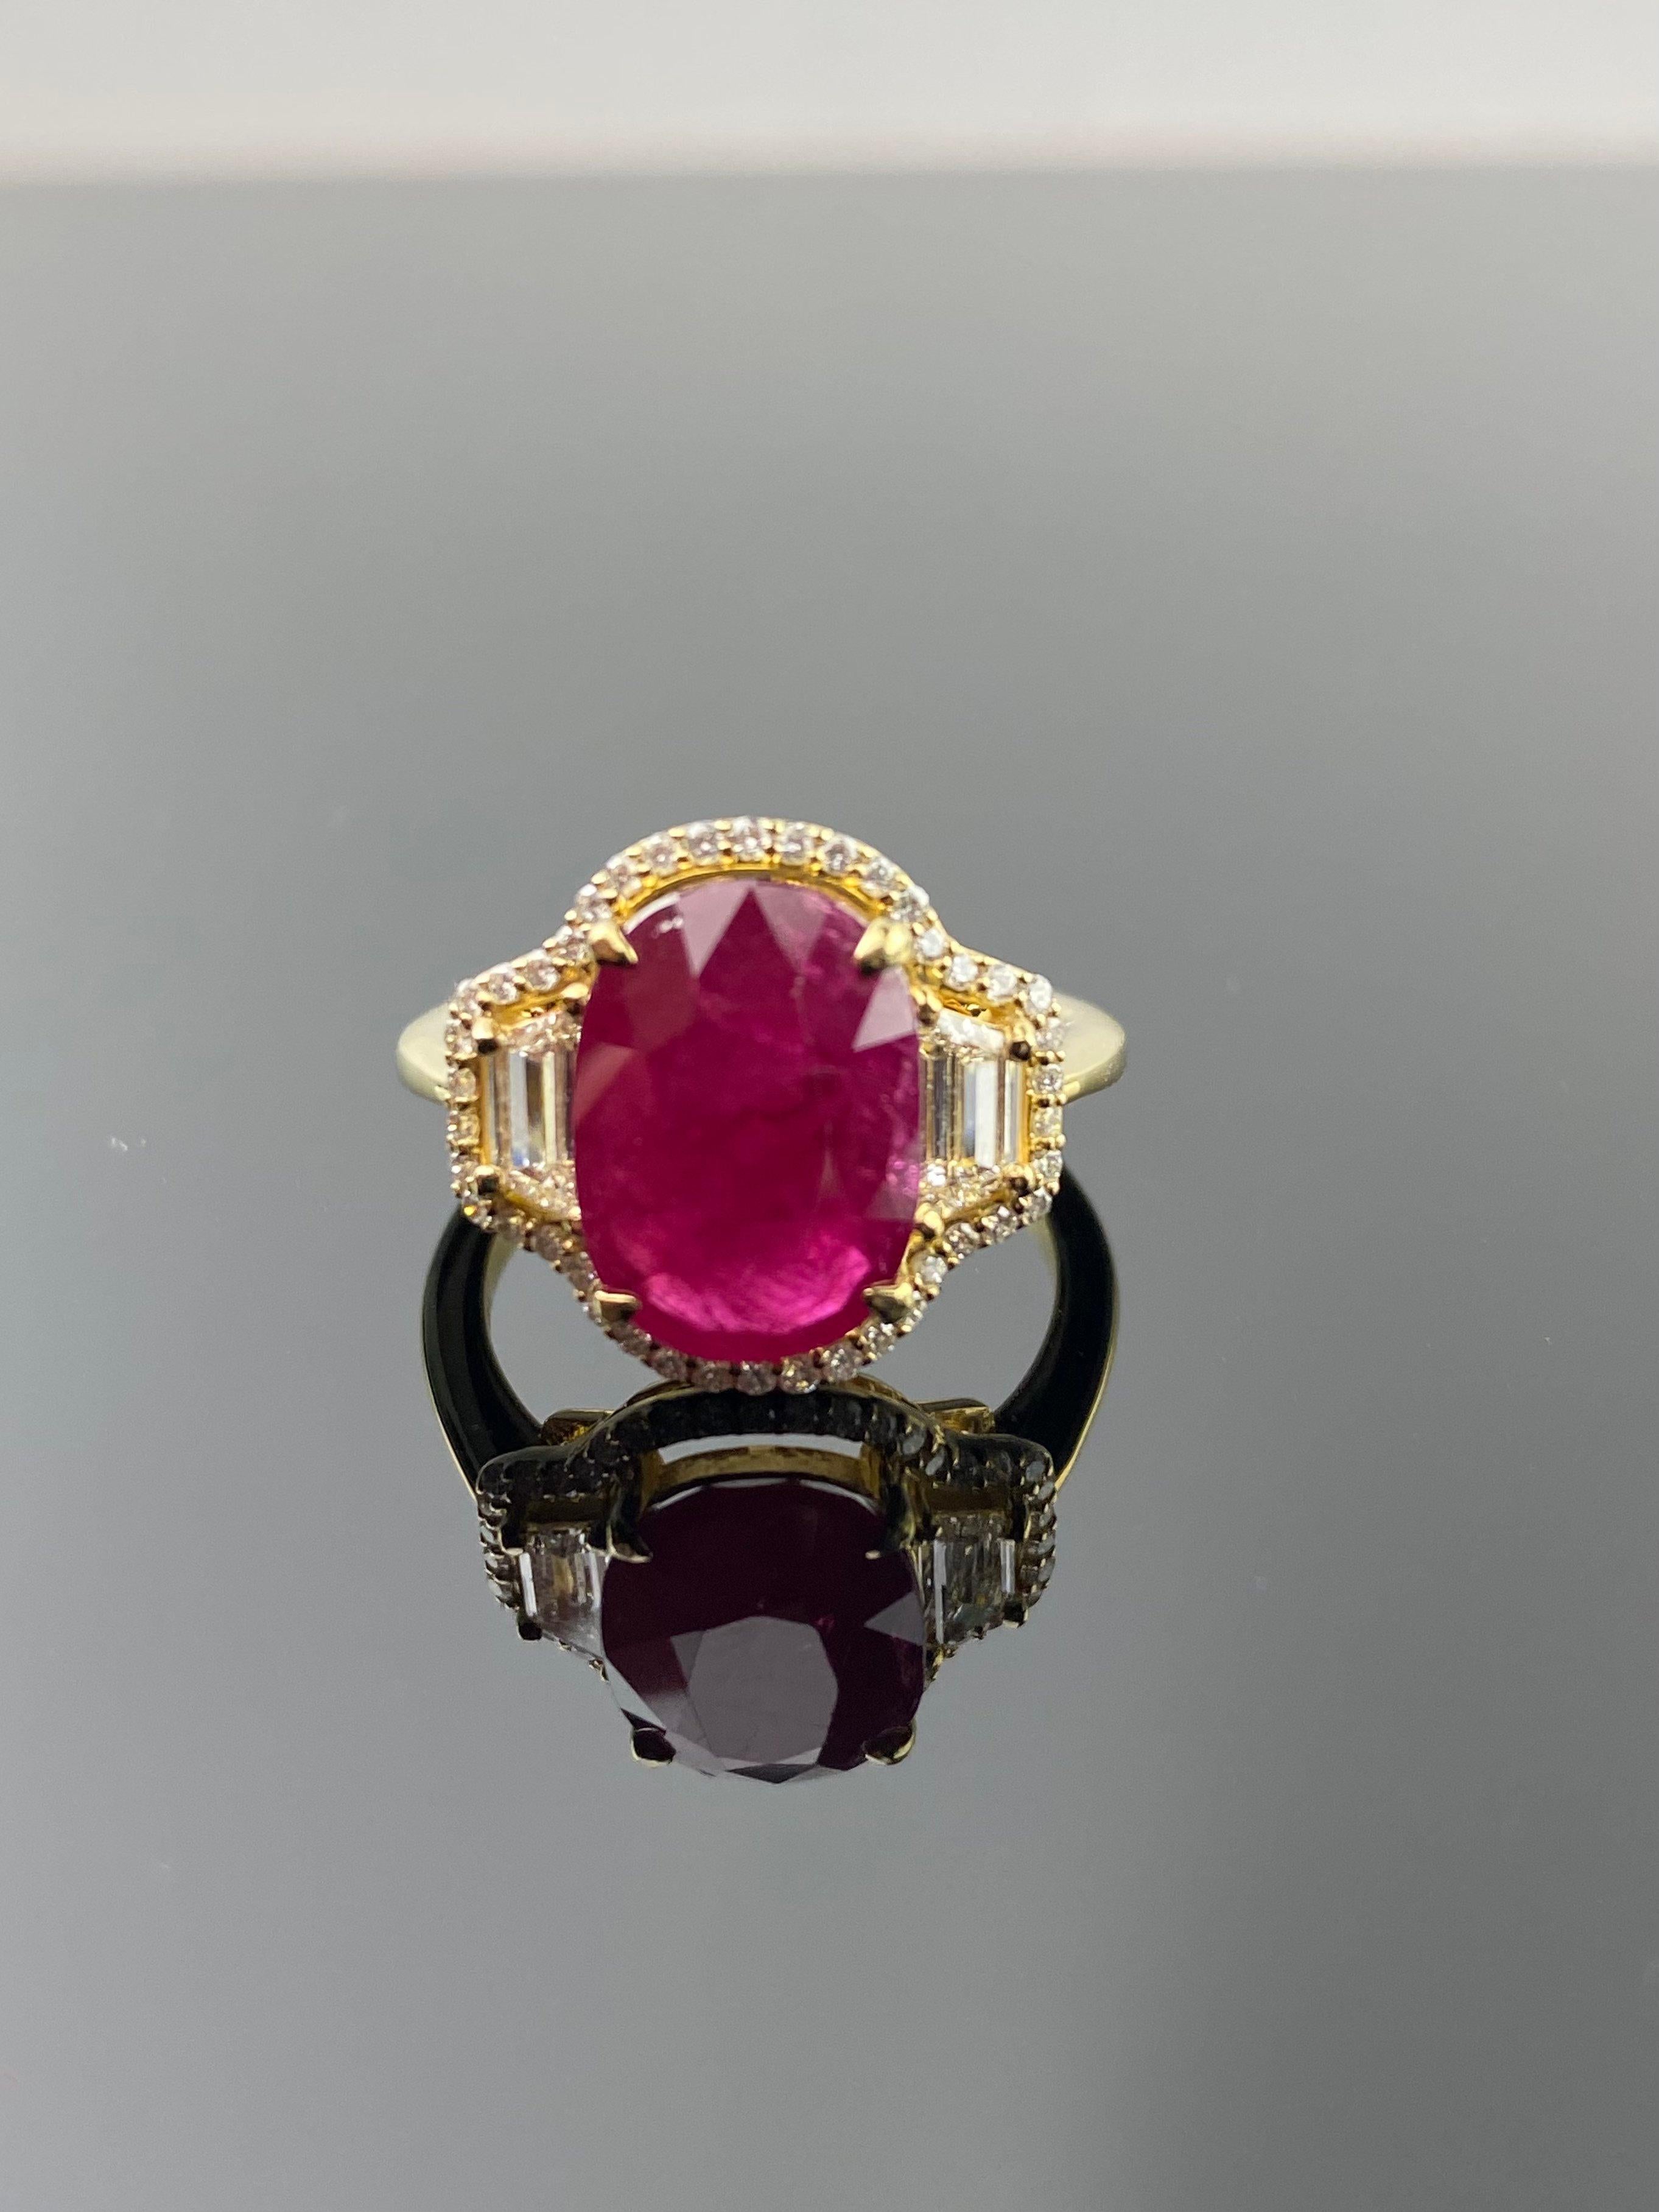 A spectacular oval shaped red heated Burma Ruby commands attention in this extraordinary 18K yellow gold ring. The stoplight-red ruby weighs 4.94 carats, two sleek trapezoid diamonds weighing 0.37 carats, surrounded by smaller round brilliant